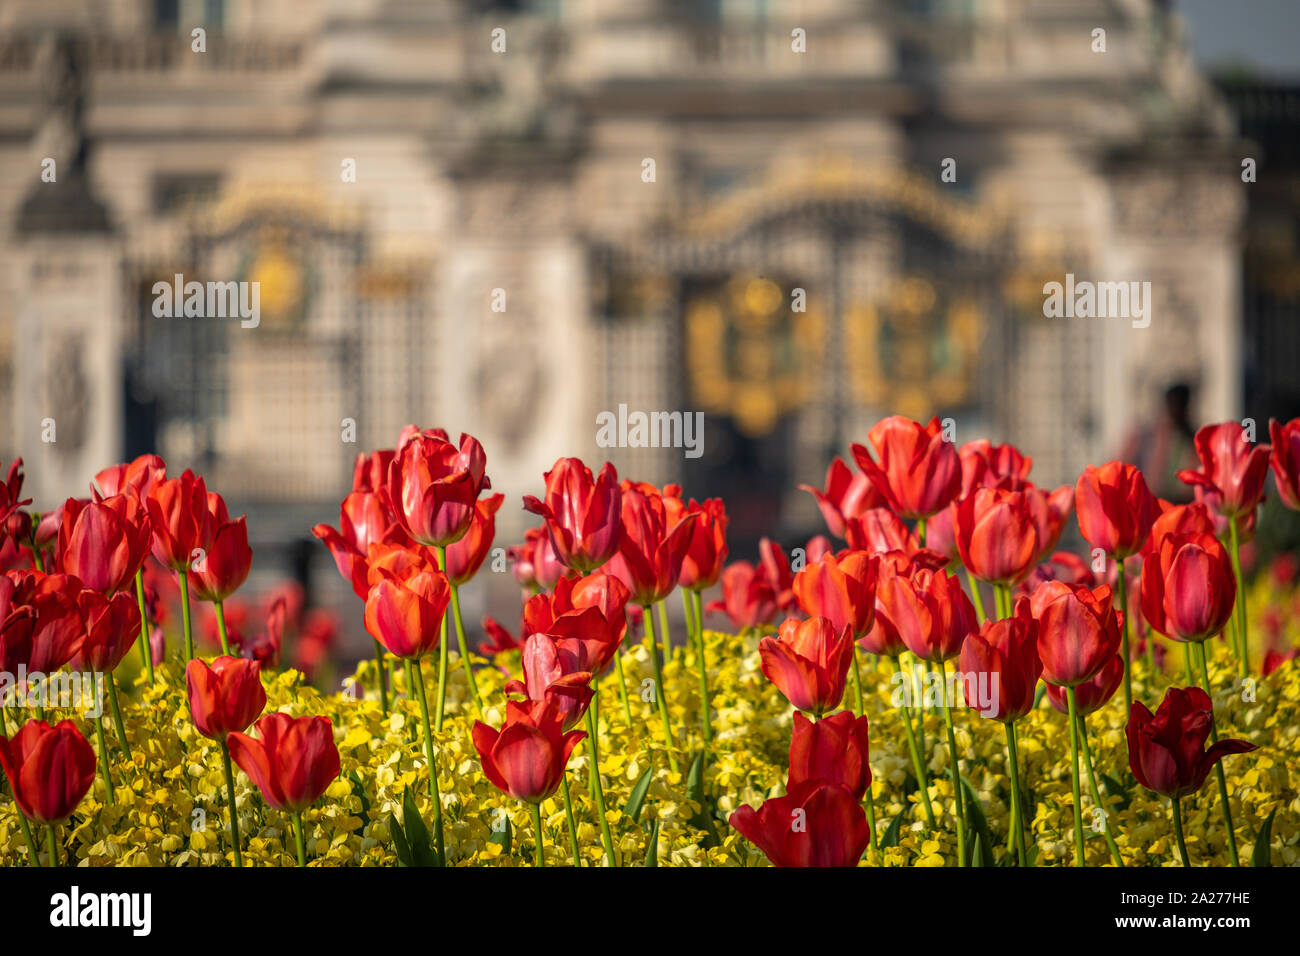 Telephoto shot of flowers in front of Buckingham Palace, London. The base of the Victoria Memorial and Palace are defocused in the background Stock Photo